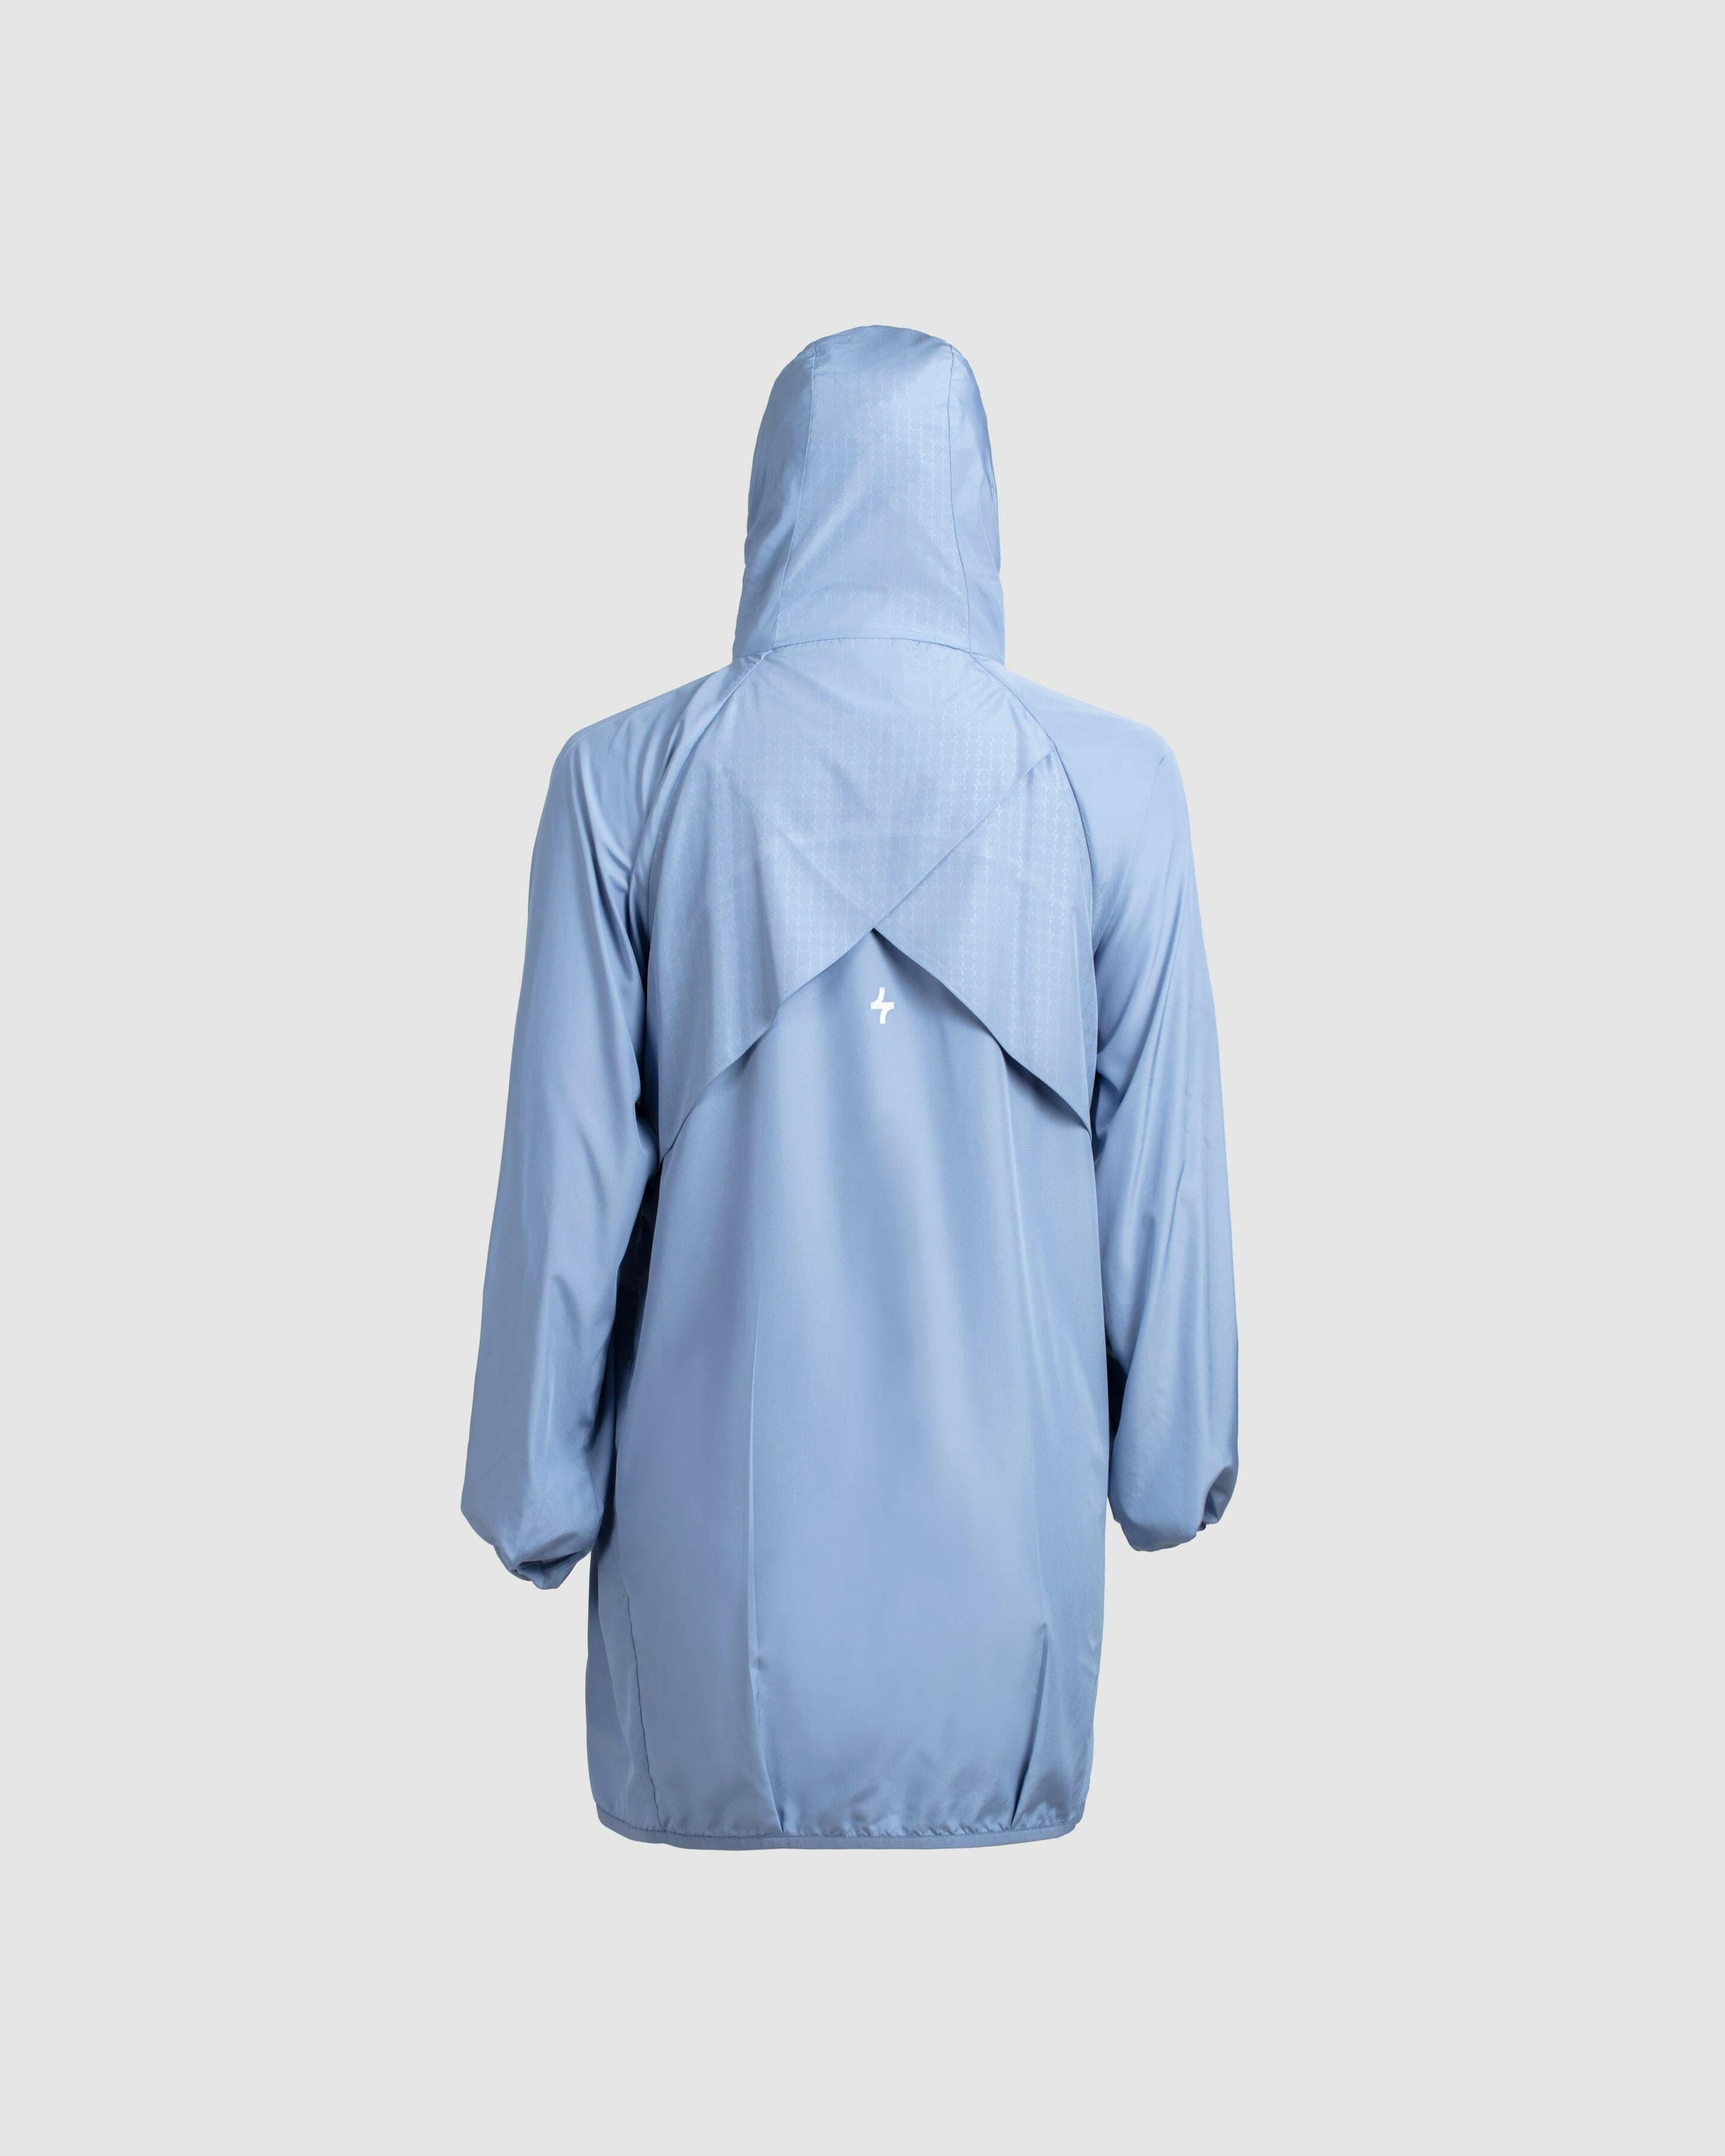 Back view of a lightweight Infinity Blue COOLDOWN coat by Qynda with a hood, displayed against a neutral background.